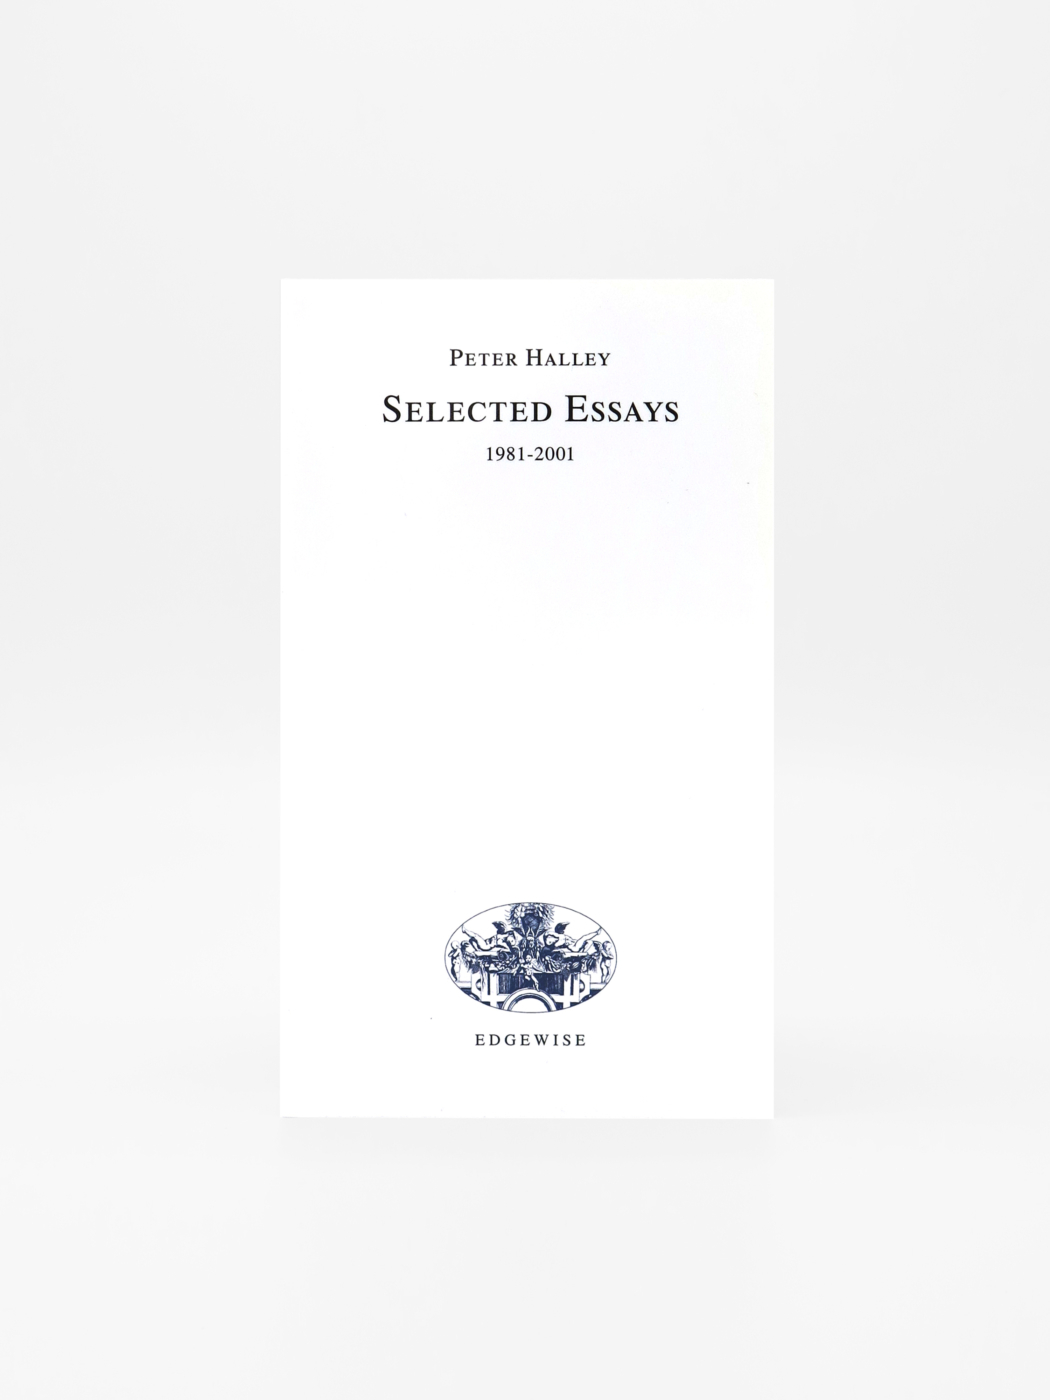 Peter Halley, Selected Essays: 1981-2001